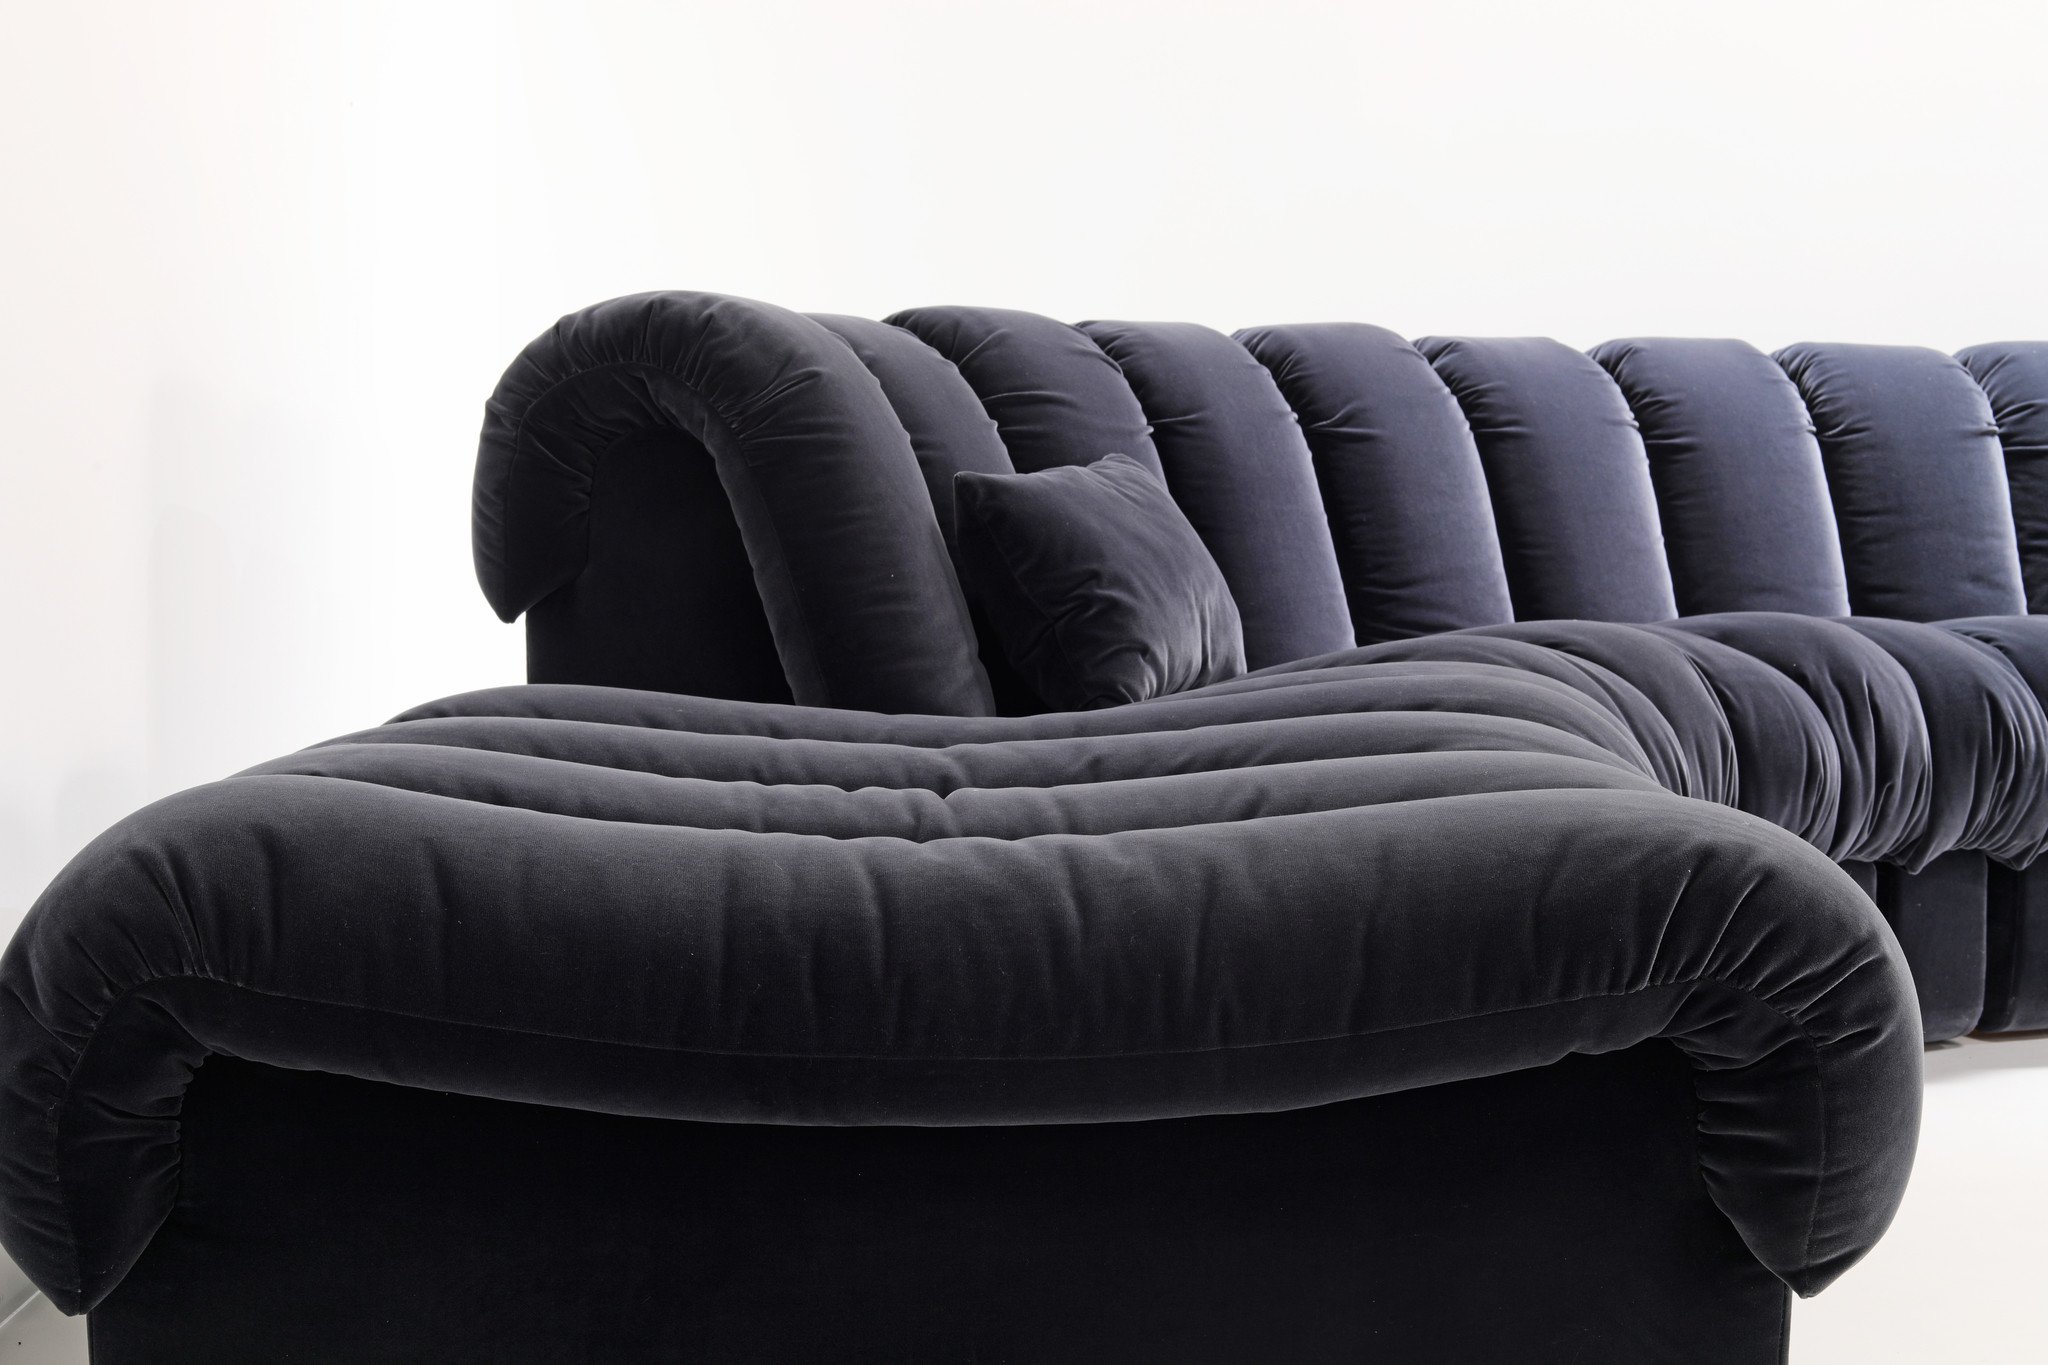 THE ICONIC "SNAKE SOFA" THE SEDE DS600